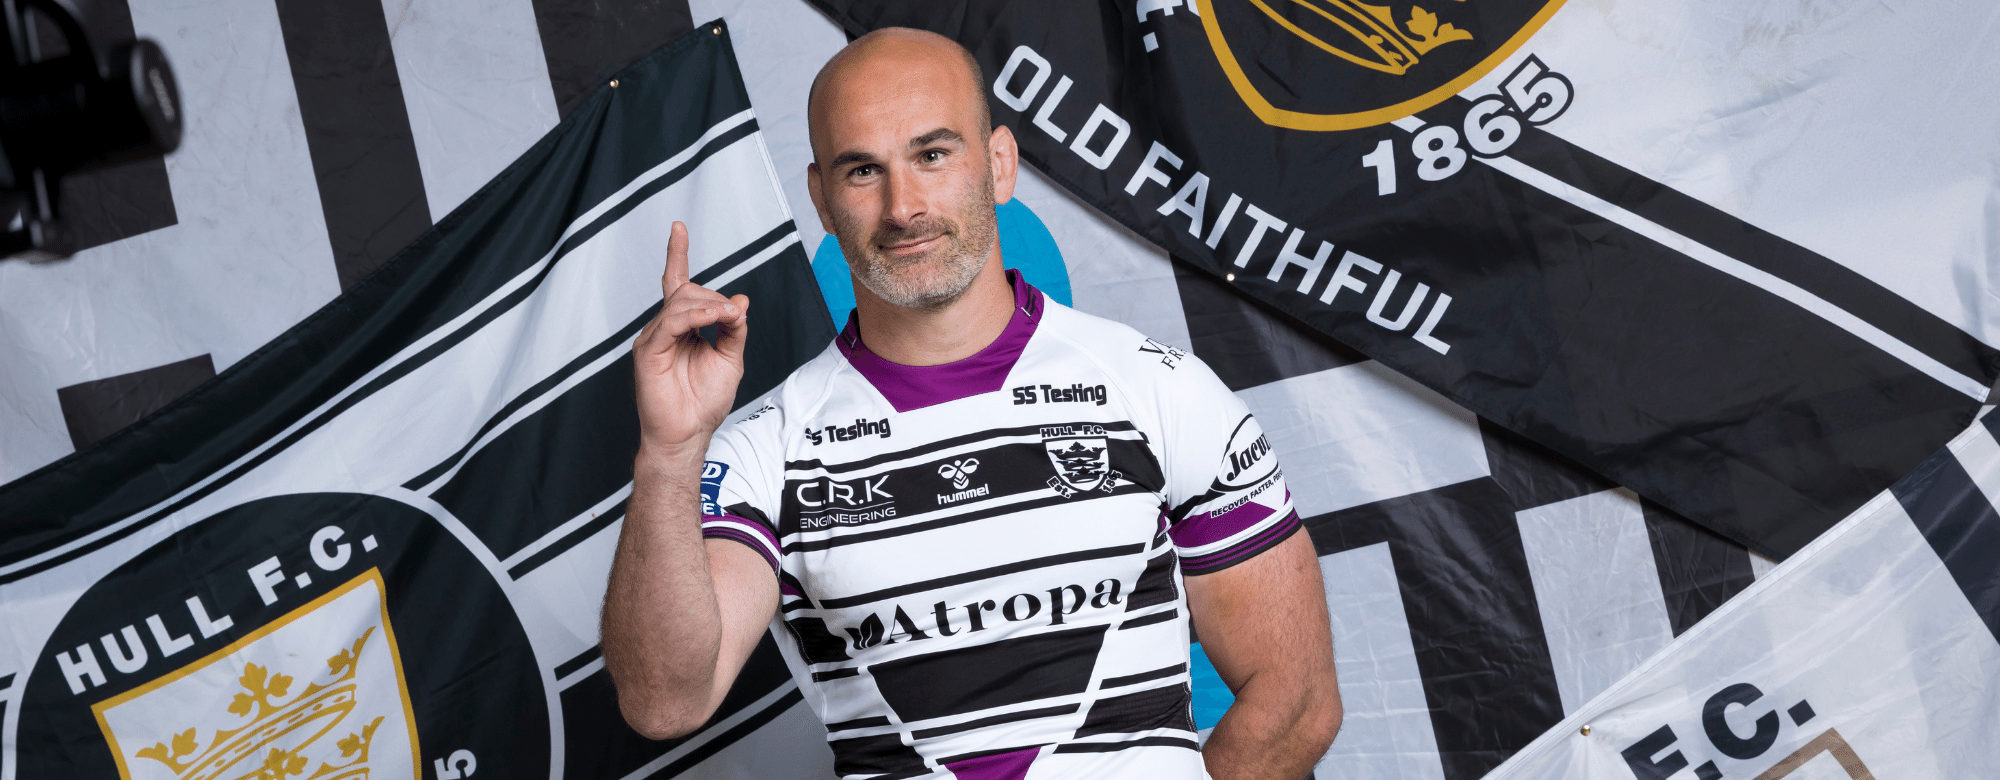 Hull FC Reveal 1990s Inspired Retro Magic Weekend Jersey!